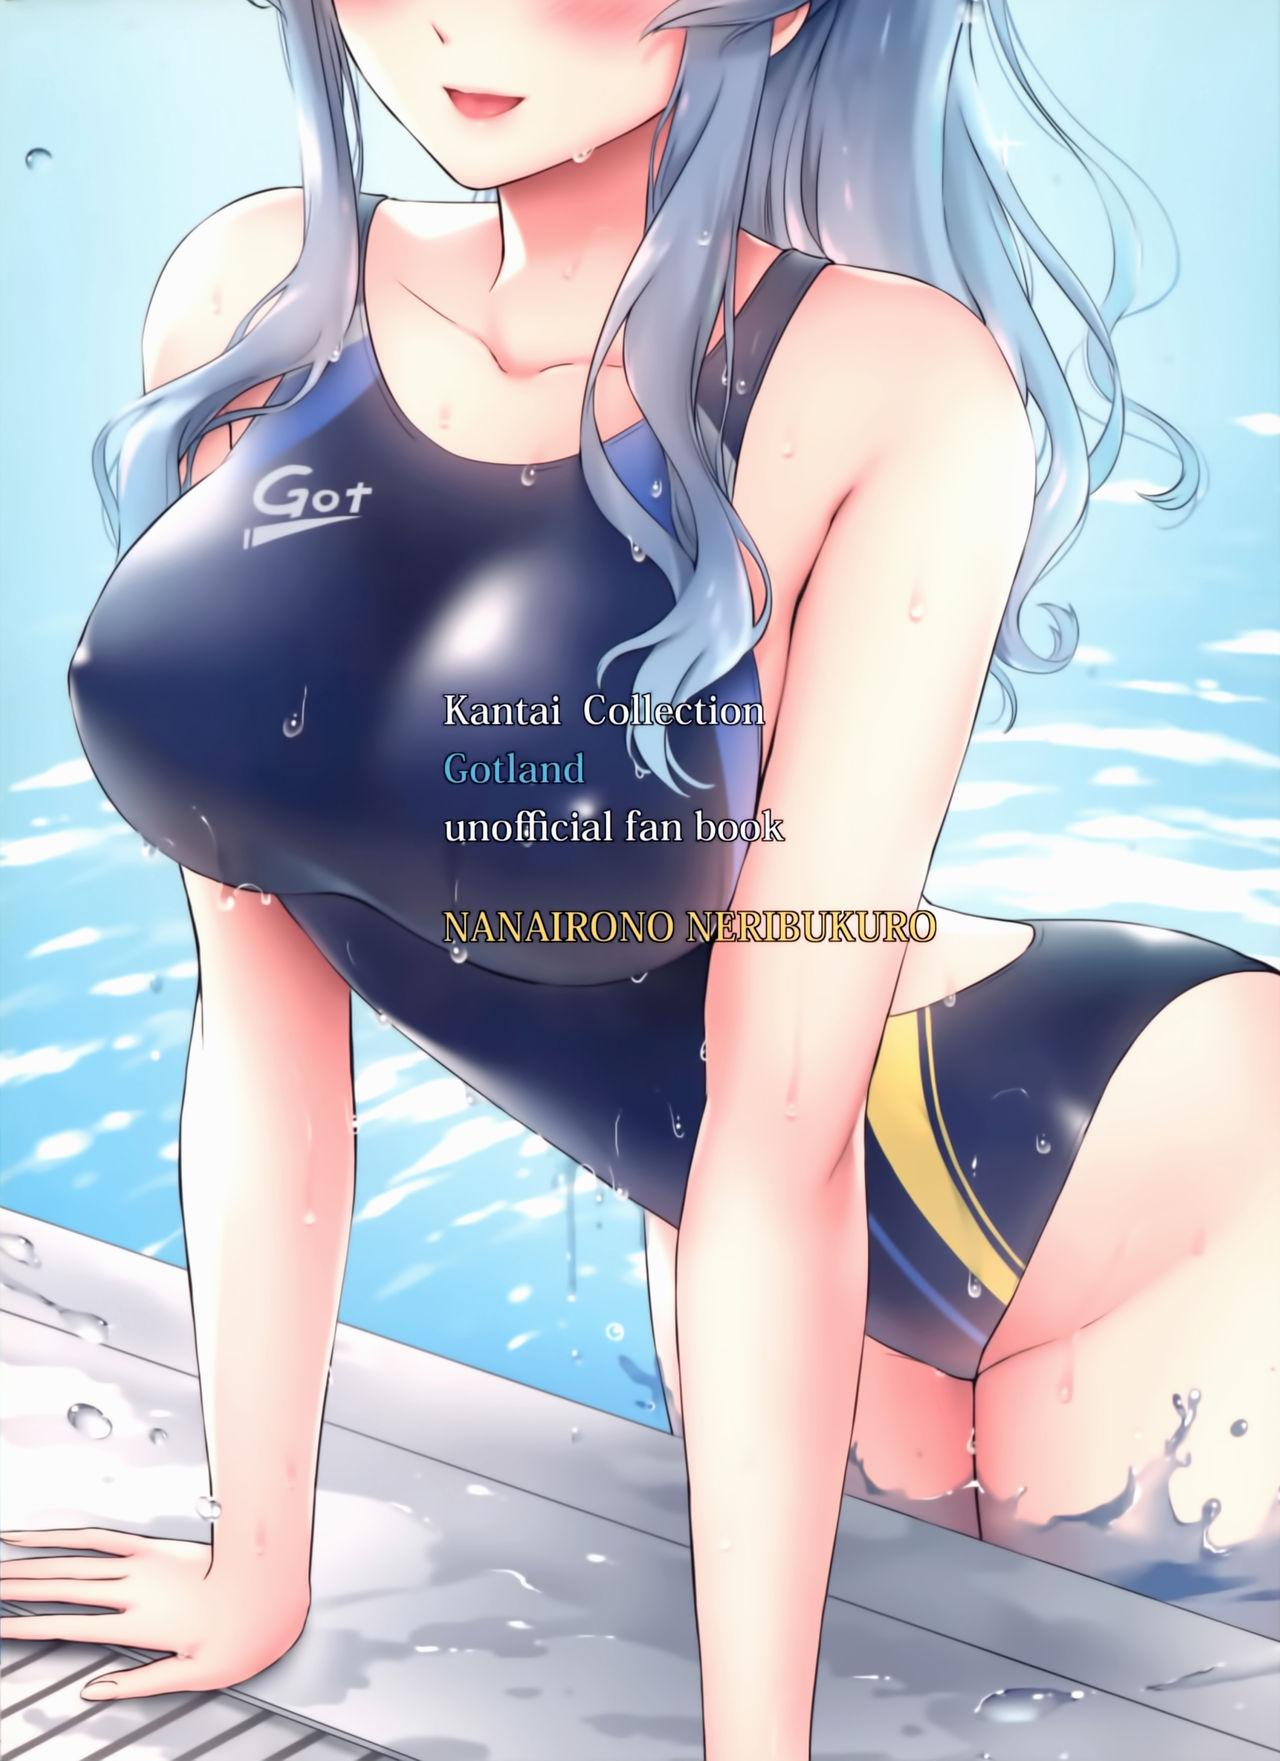 Celebrity Got-chan to Poolside de - Kantai collection Booty - Page 18